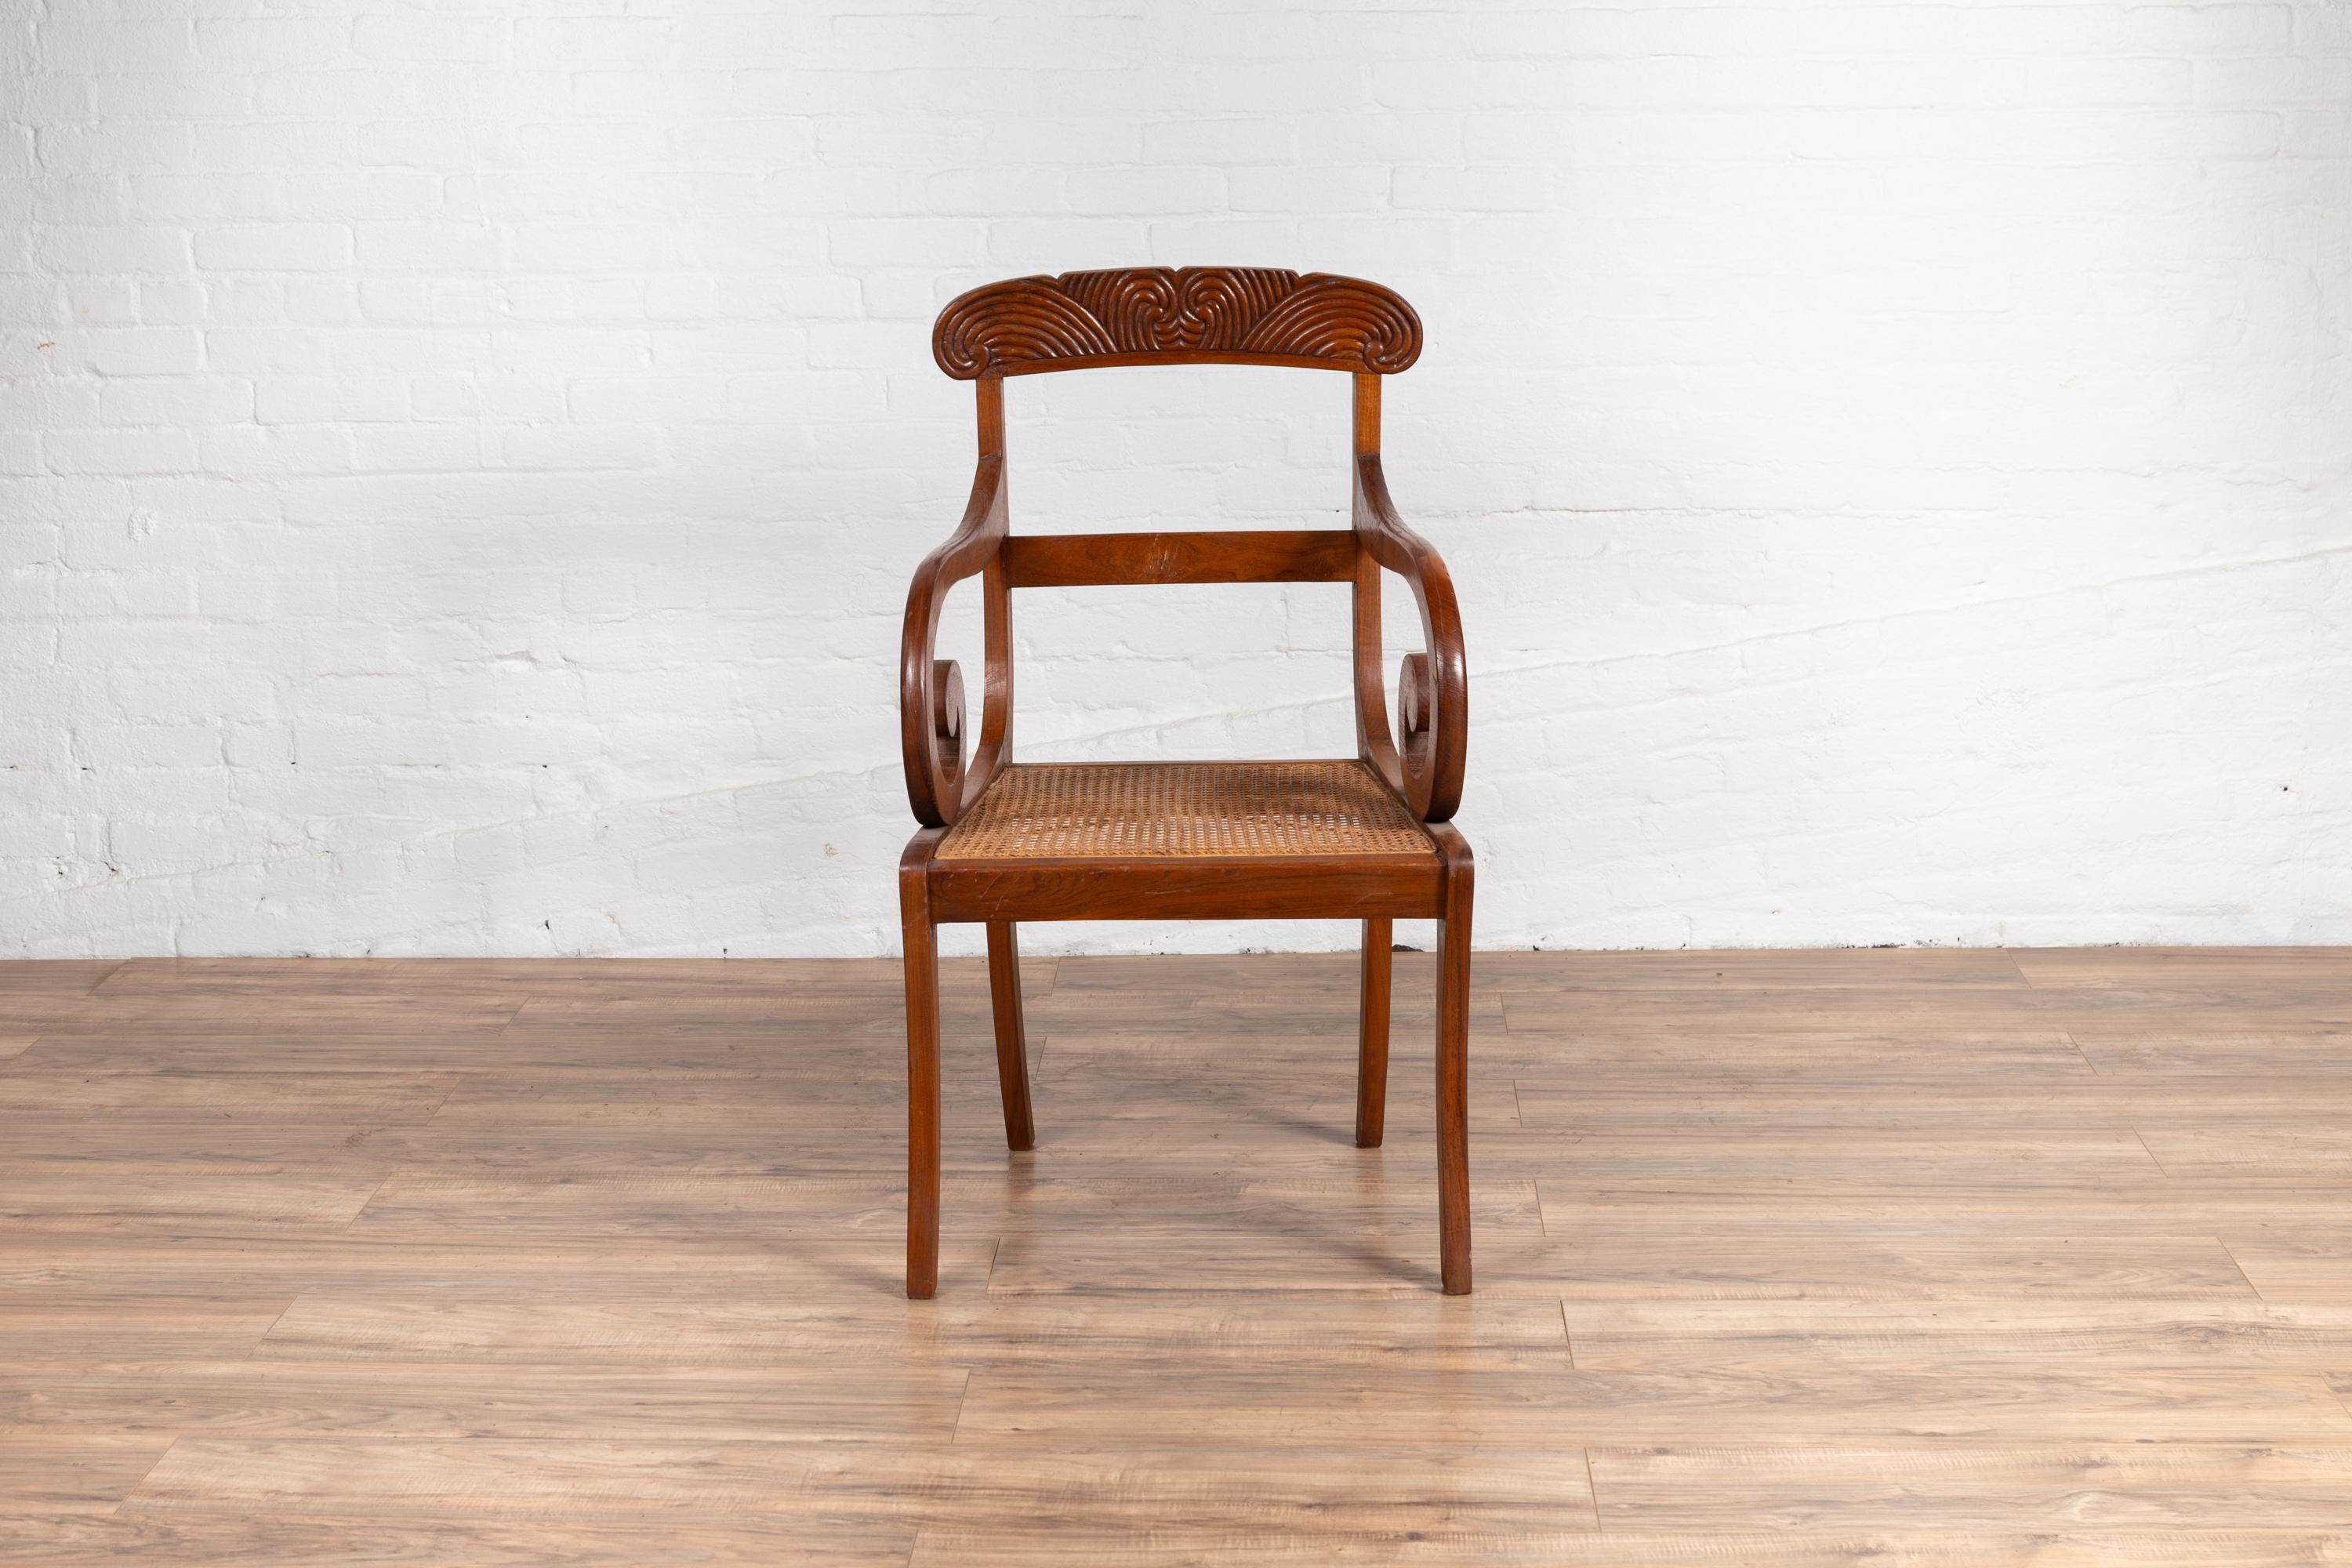 20th Century Javanese Antique Armchair with Carved Rail, Woven Rattan Seat and Curving Arms